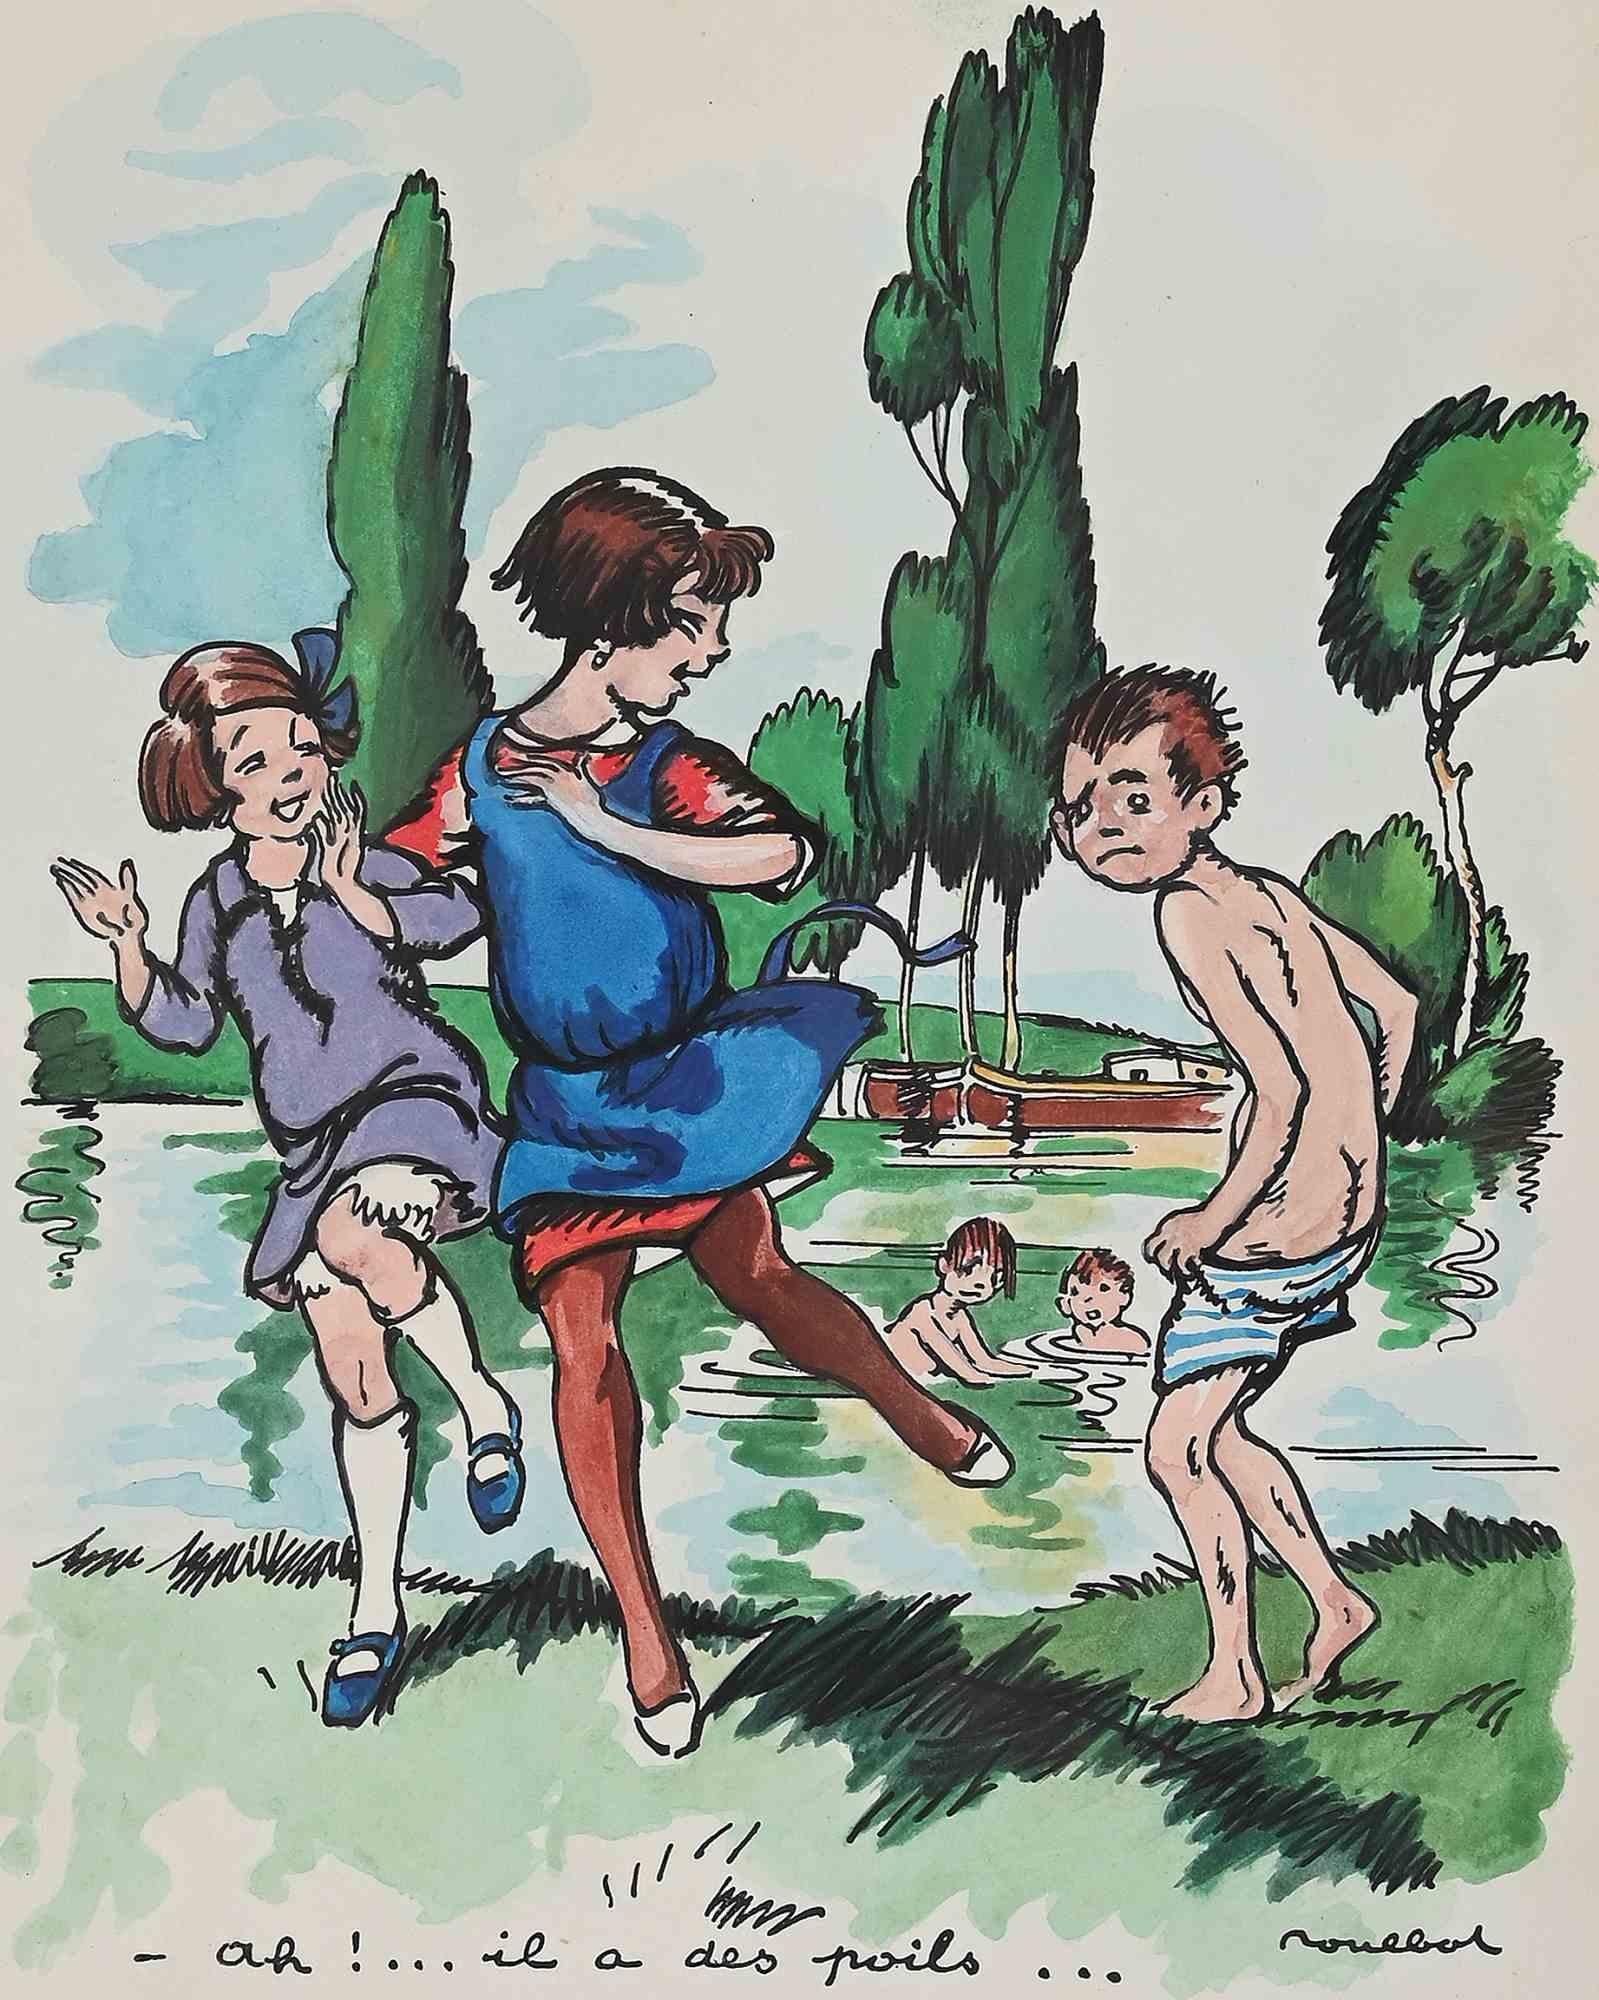 Children Games - Drawing - Late 20th Century - Art by Unknown